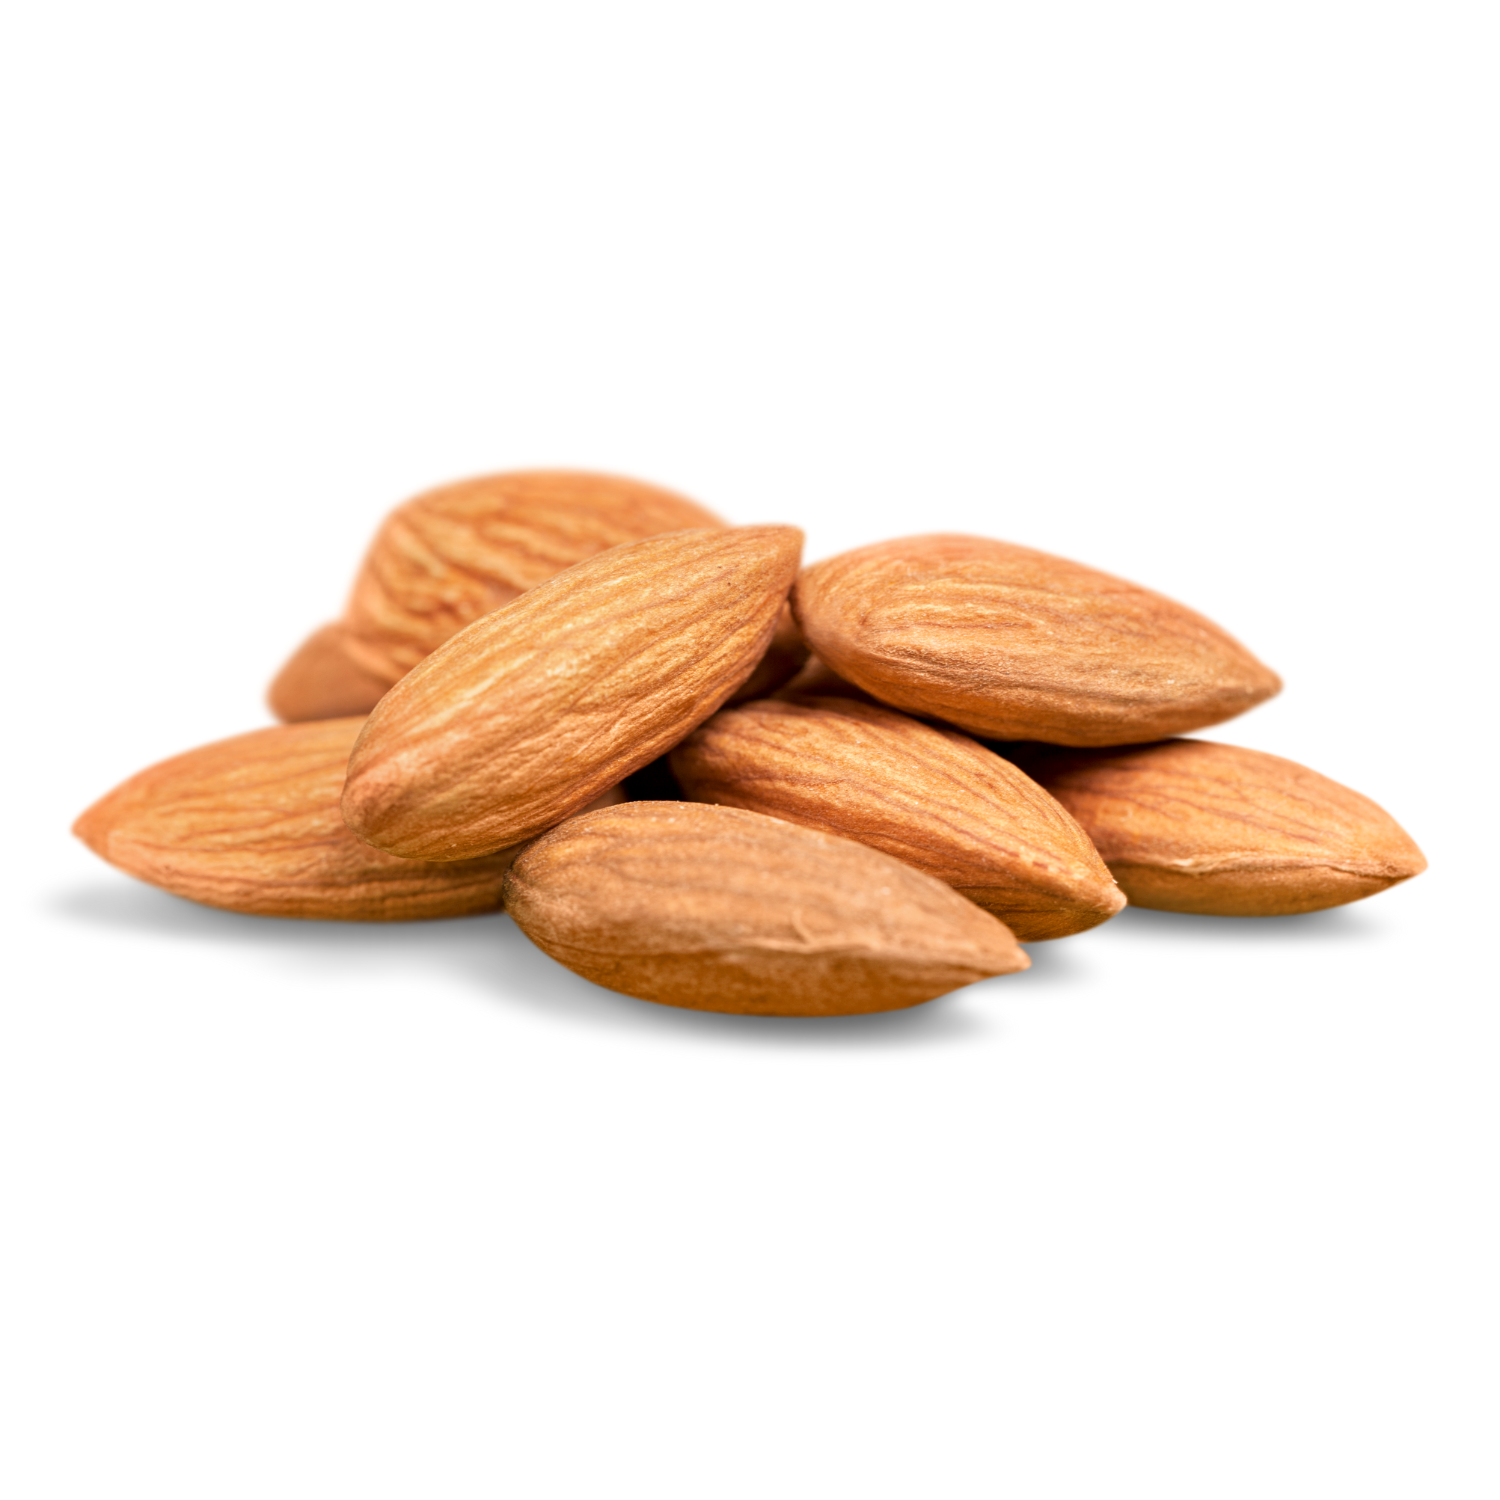 A pile of whole almonds on a white background